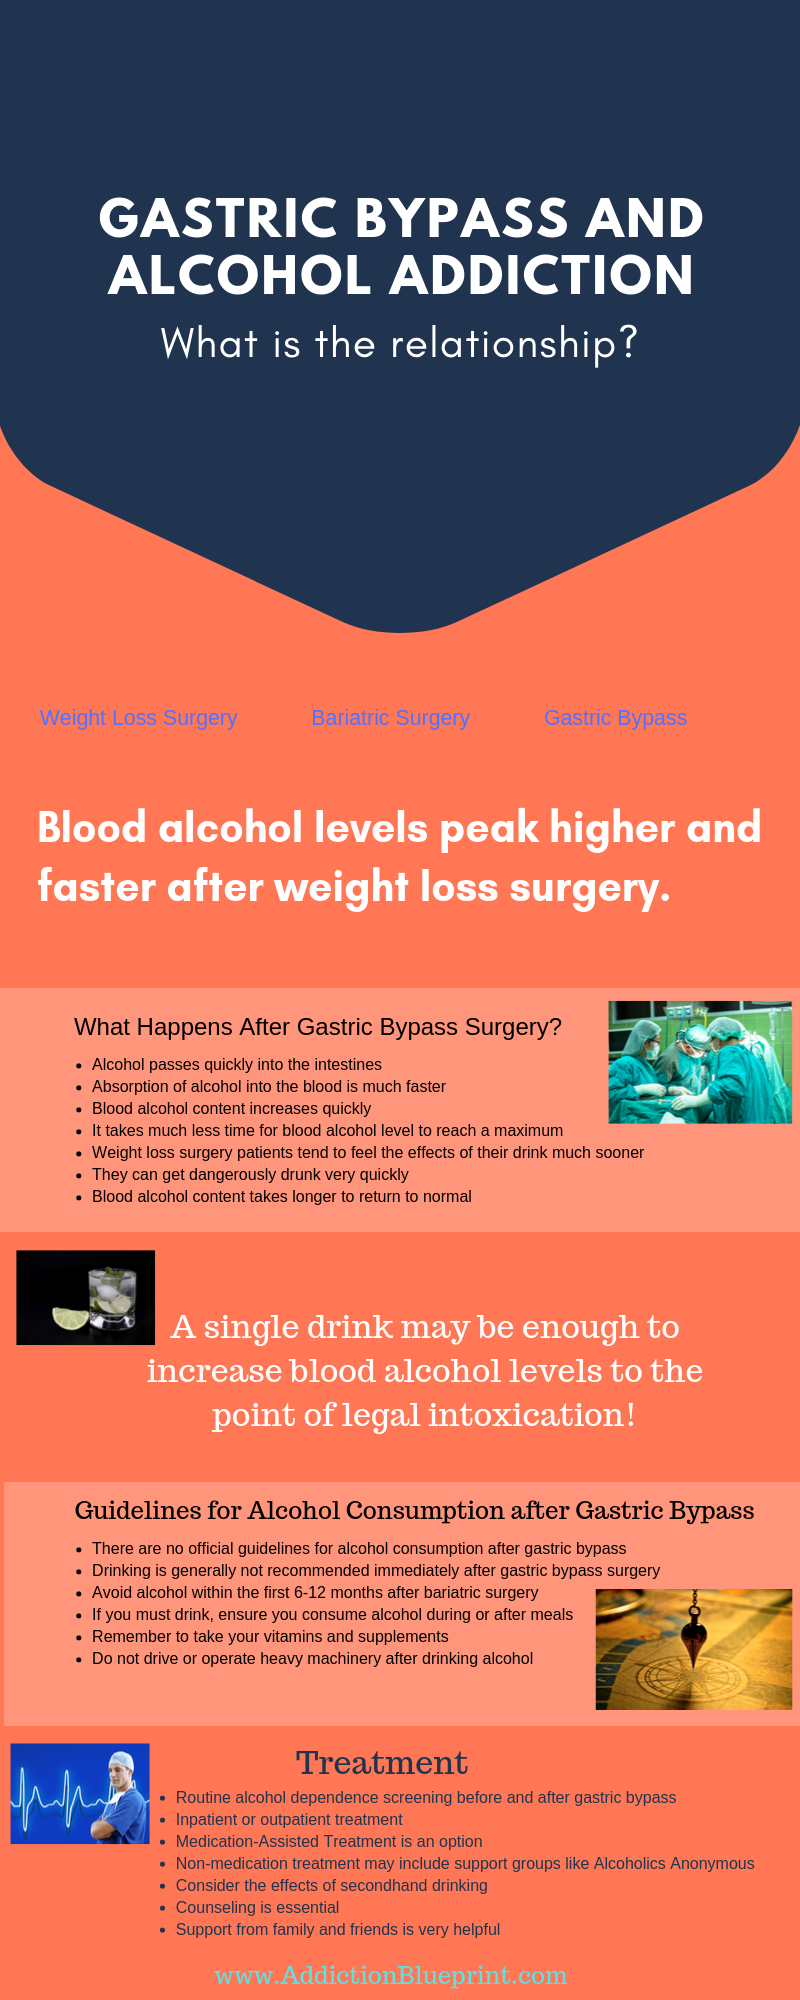 Gastric Bypass and Alcohol